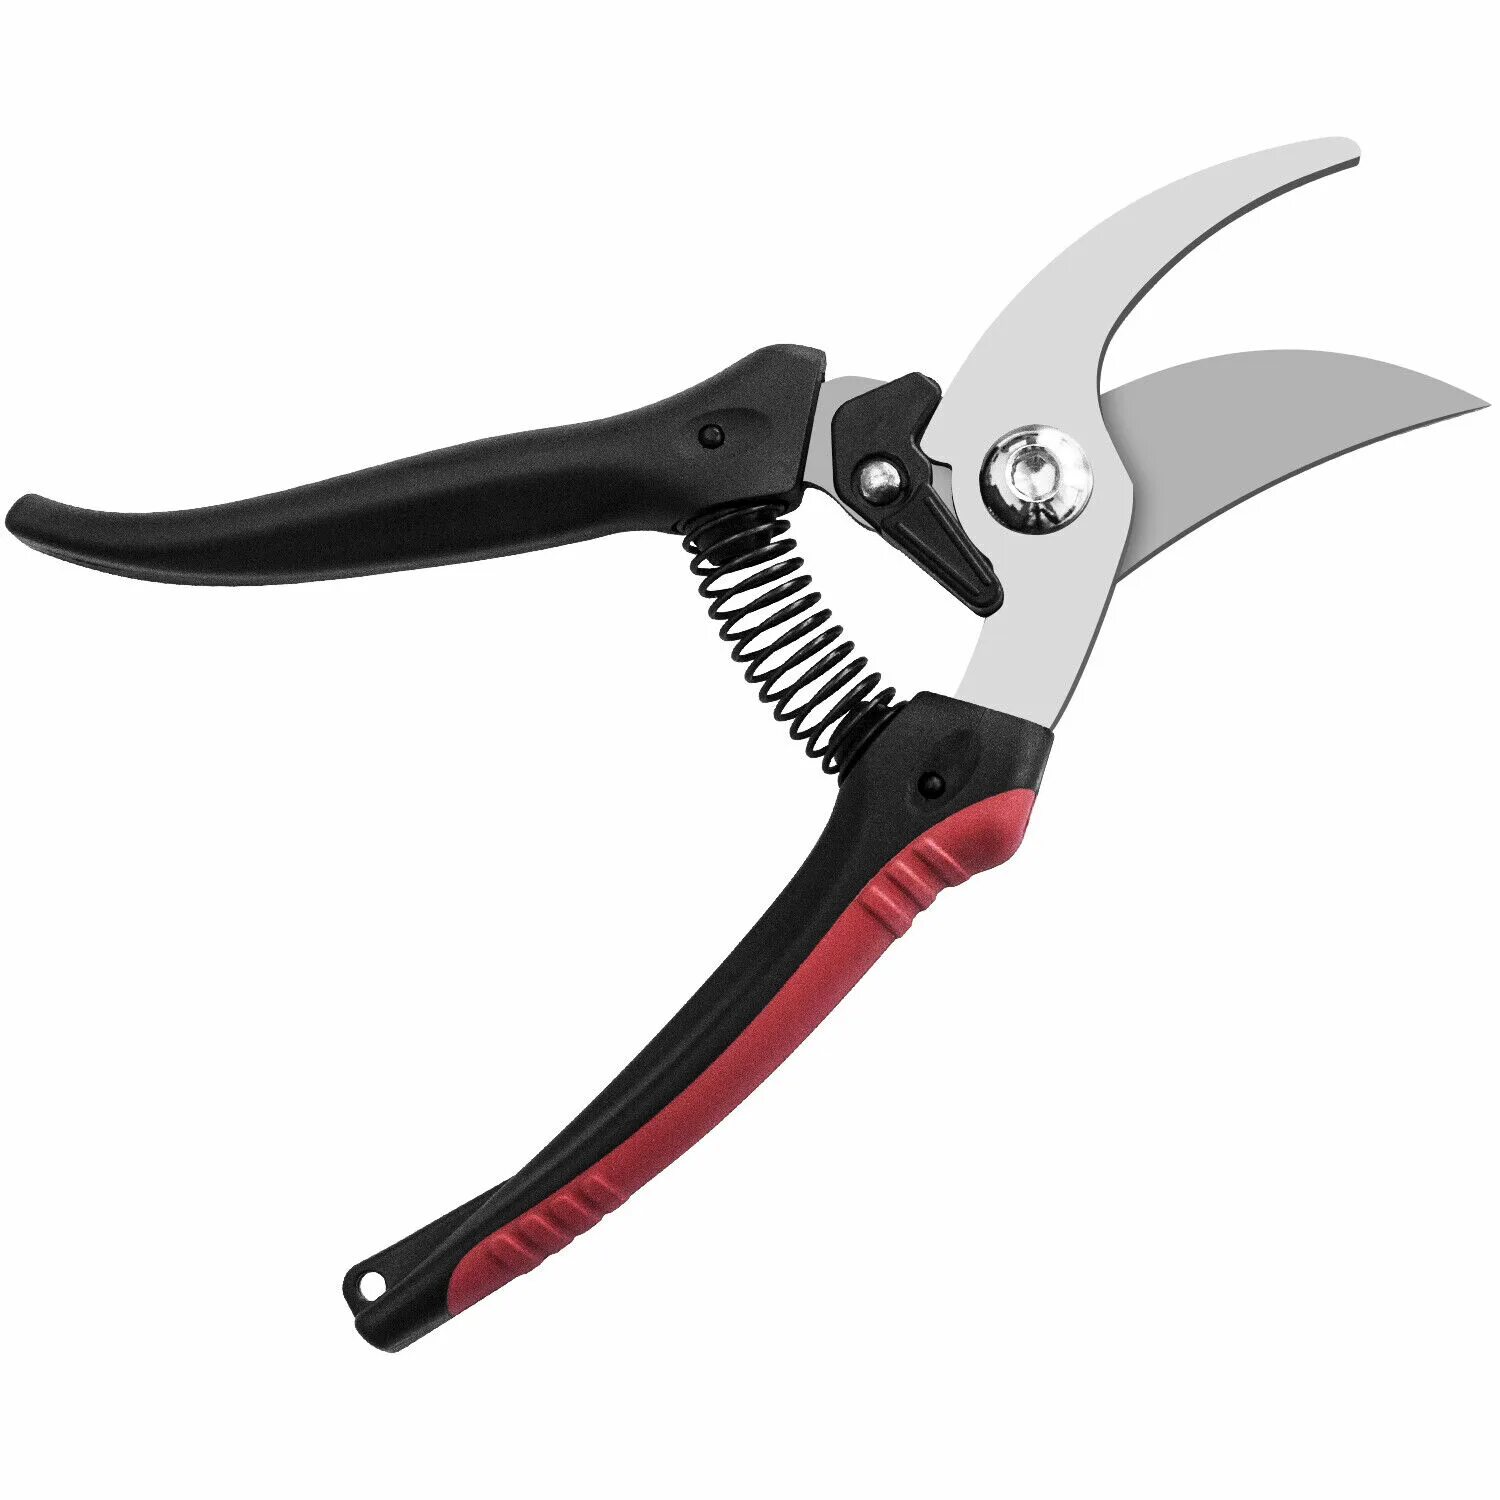 Секатор pruning Shears. Секатор БЦМ 2031. Секатор hg0005 180мм Park (1/12/48). Секатор Clauss 86 1/2 USA.